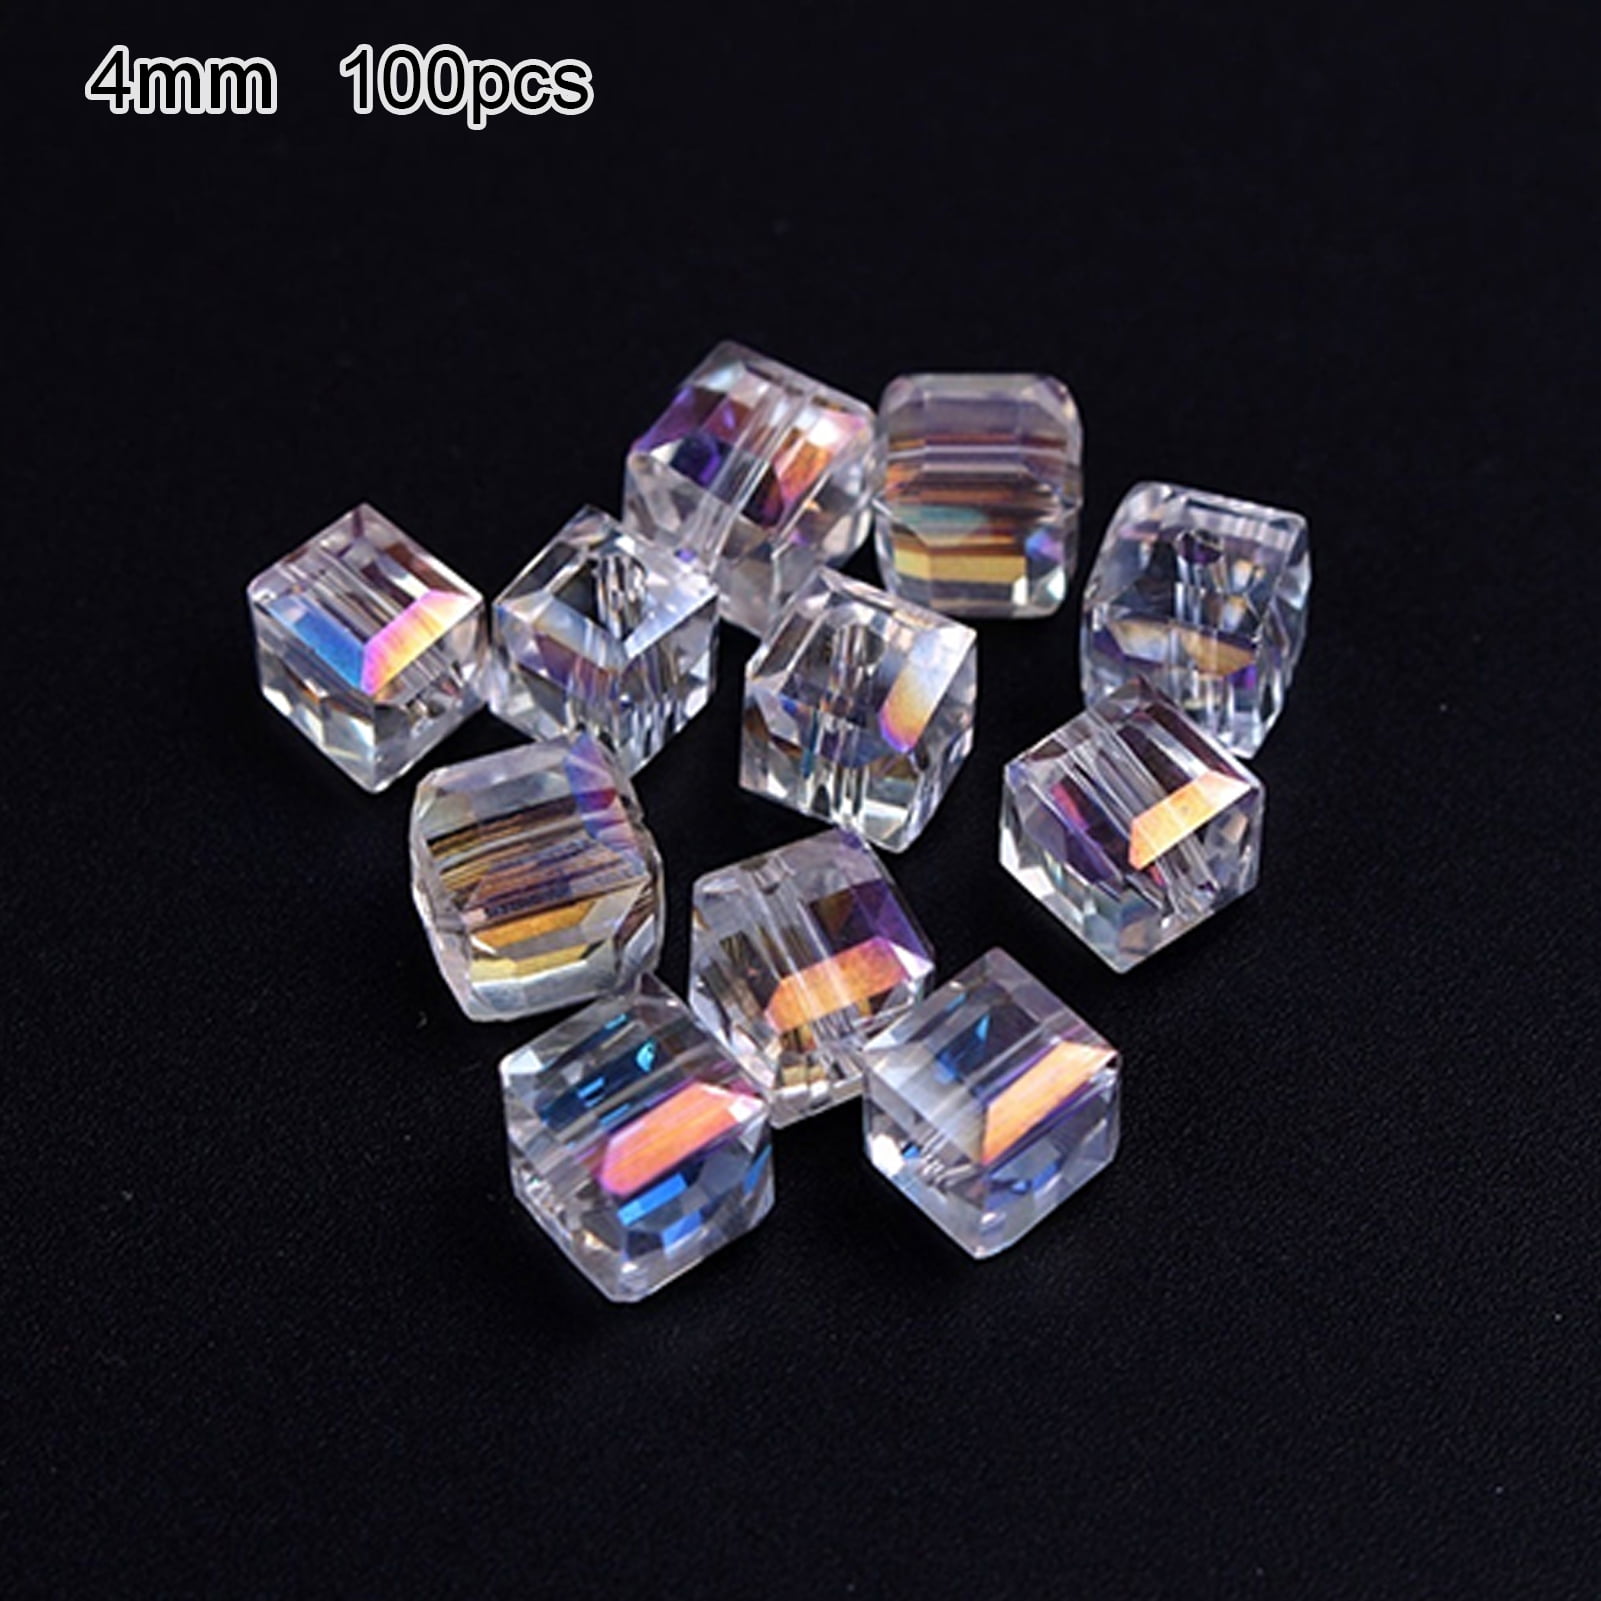 TSV 1200pcs Stone Beads, Natural Gemstone Beads, Multi-Color Irregular  Chips Stones, Crushed Chunked Crystal Pieces Loose Beads, for Jewelry  Making